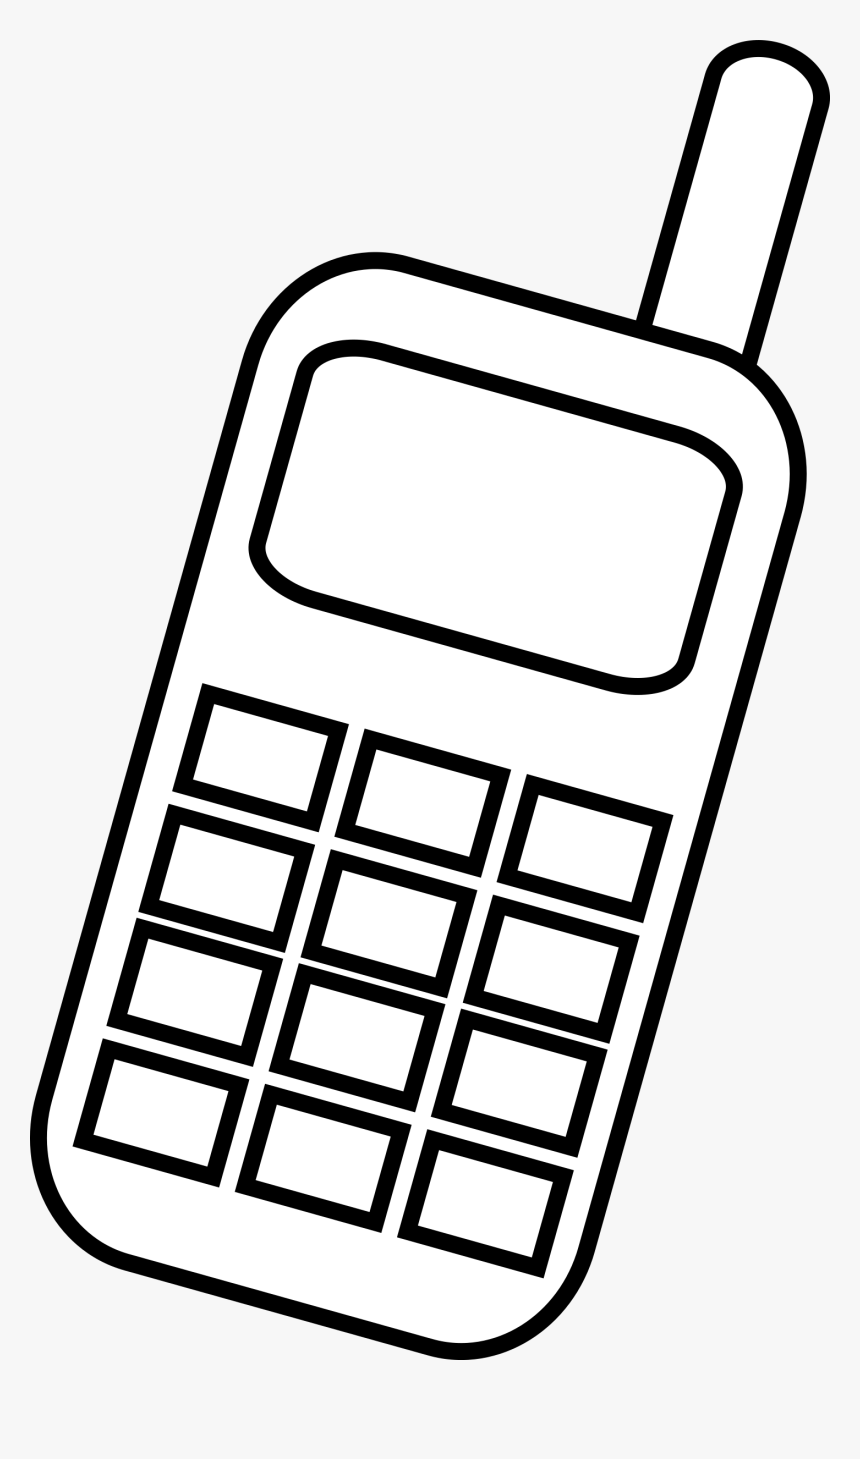 Transparent Cell Phone Icon Png Transparent - Cellphone Clipart Black And White, Png Download, Free Download